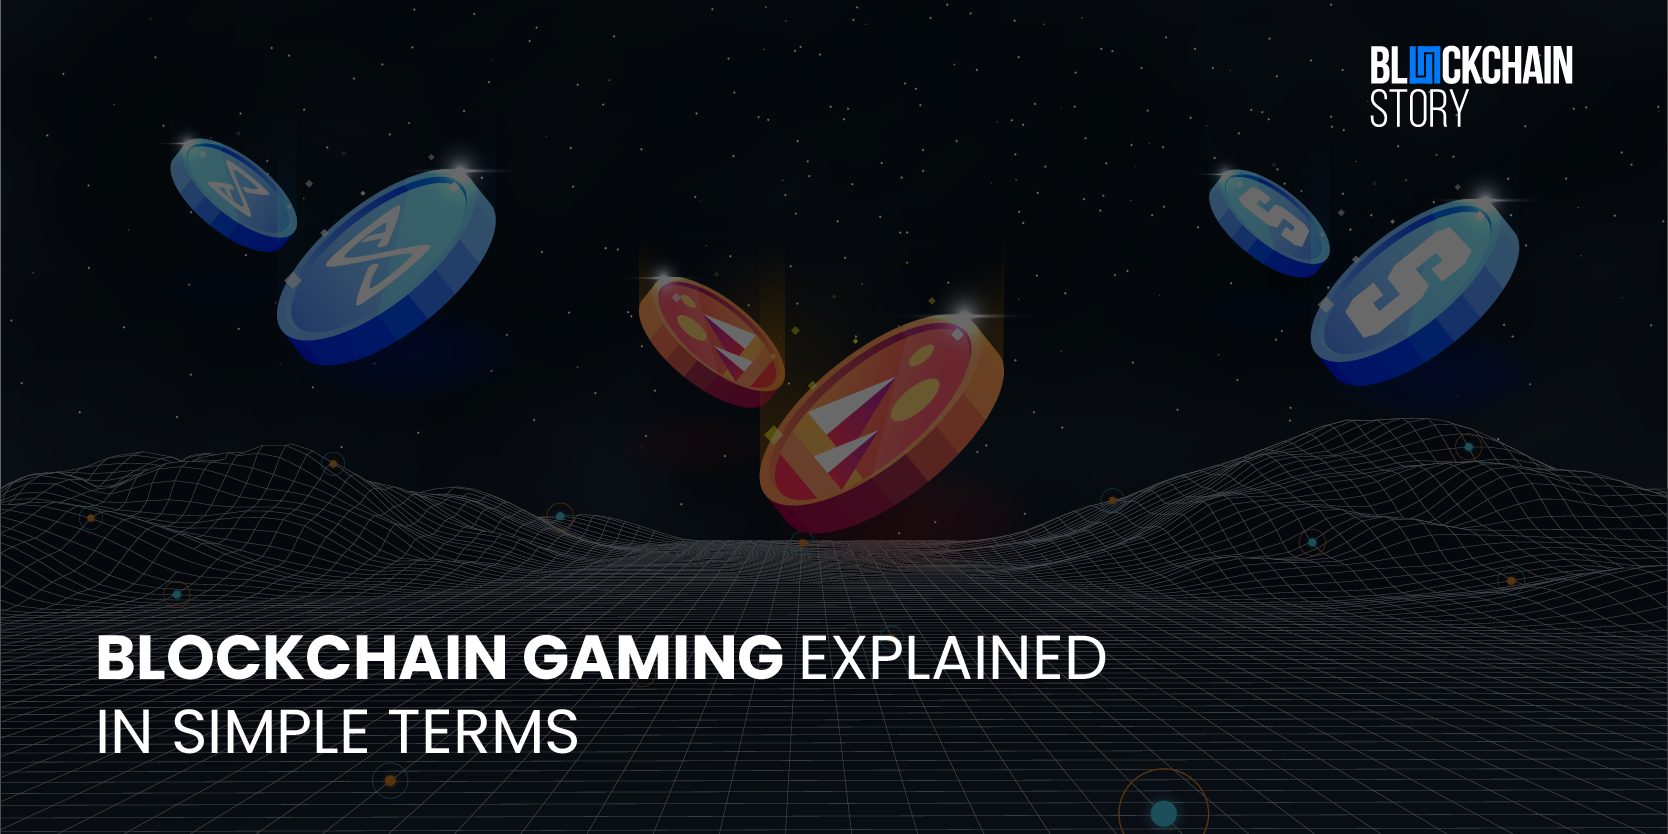 What is blockchain gaming? Basics of Axie Infinity, Sandbox, Decentraland, and blockchain gaming explained